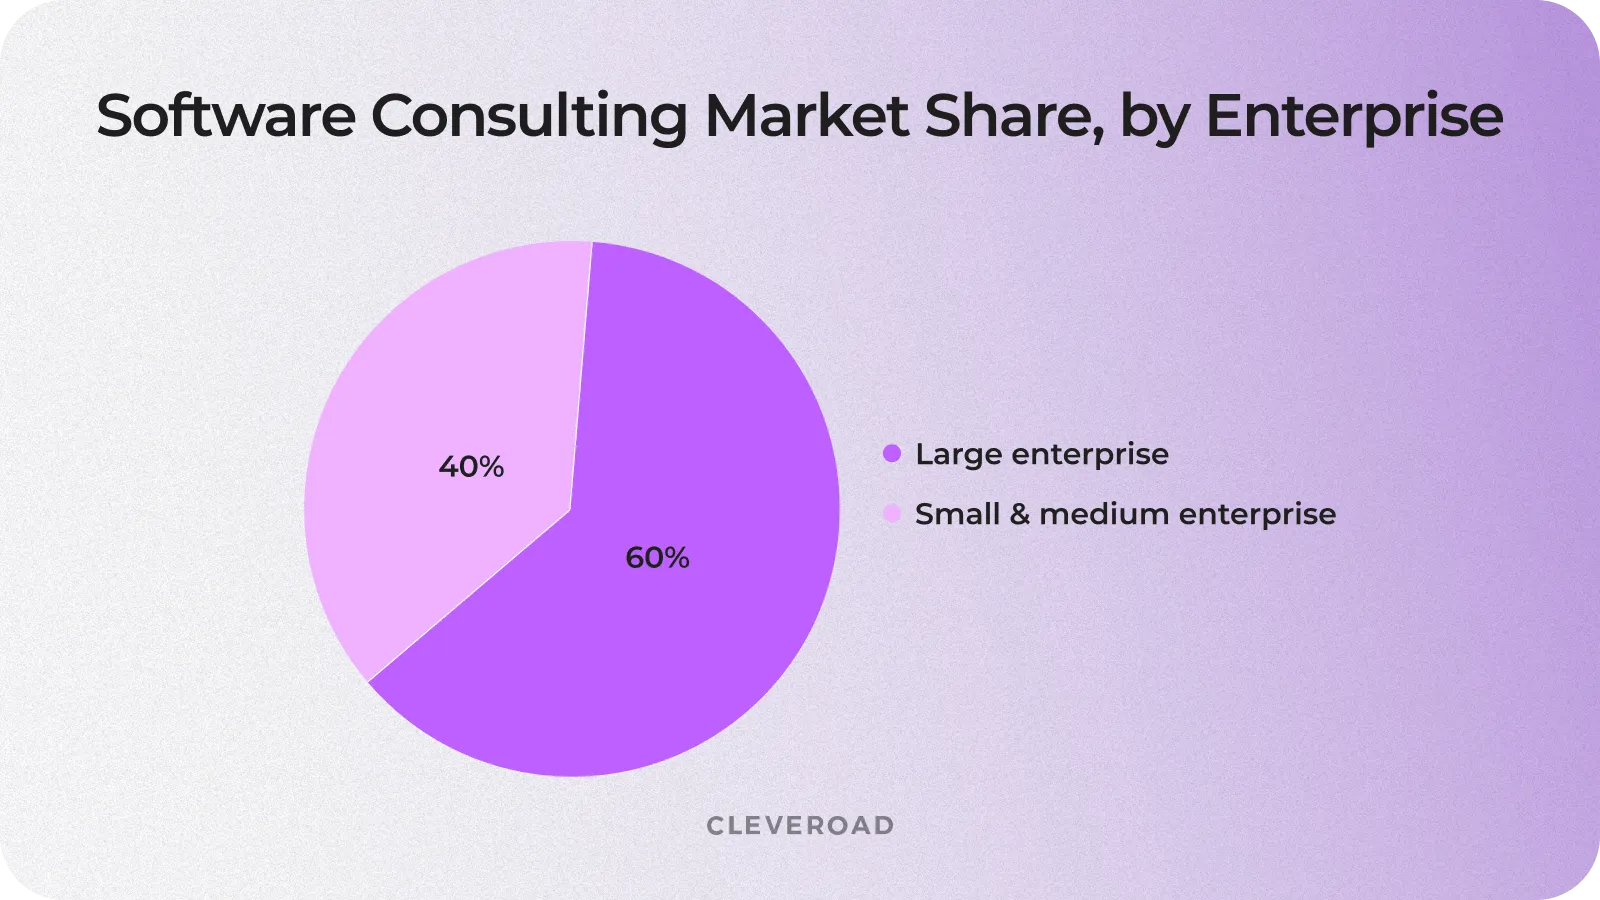 IT consulting market share in Europe, by enterprise